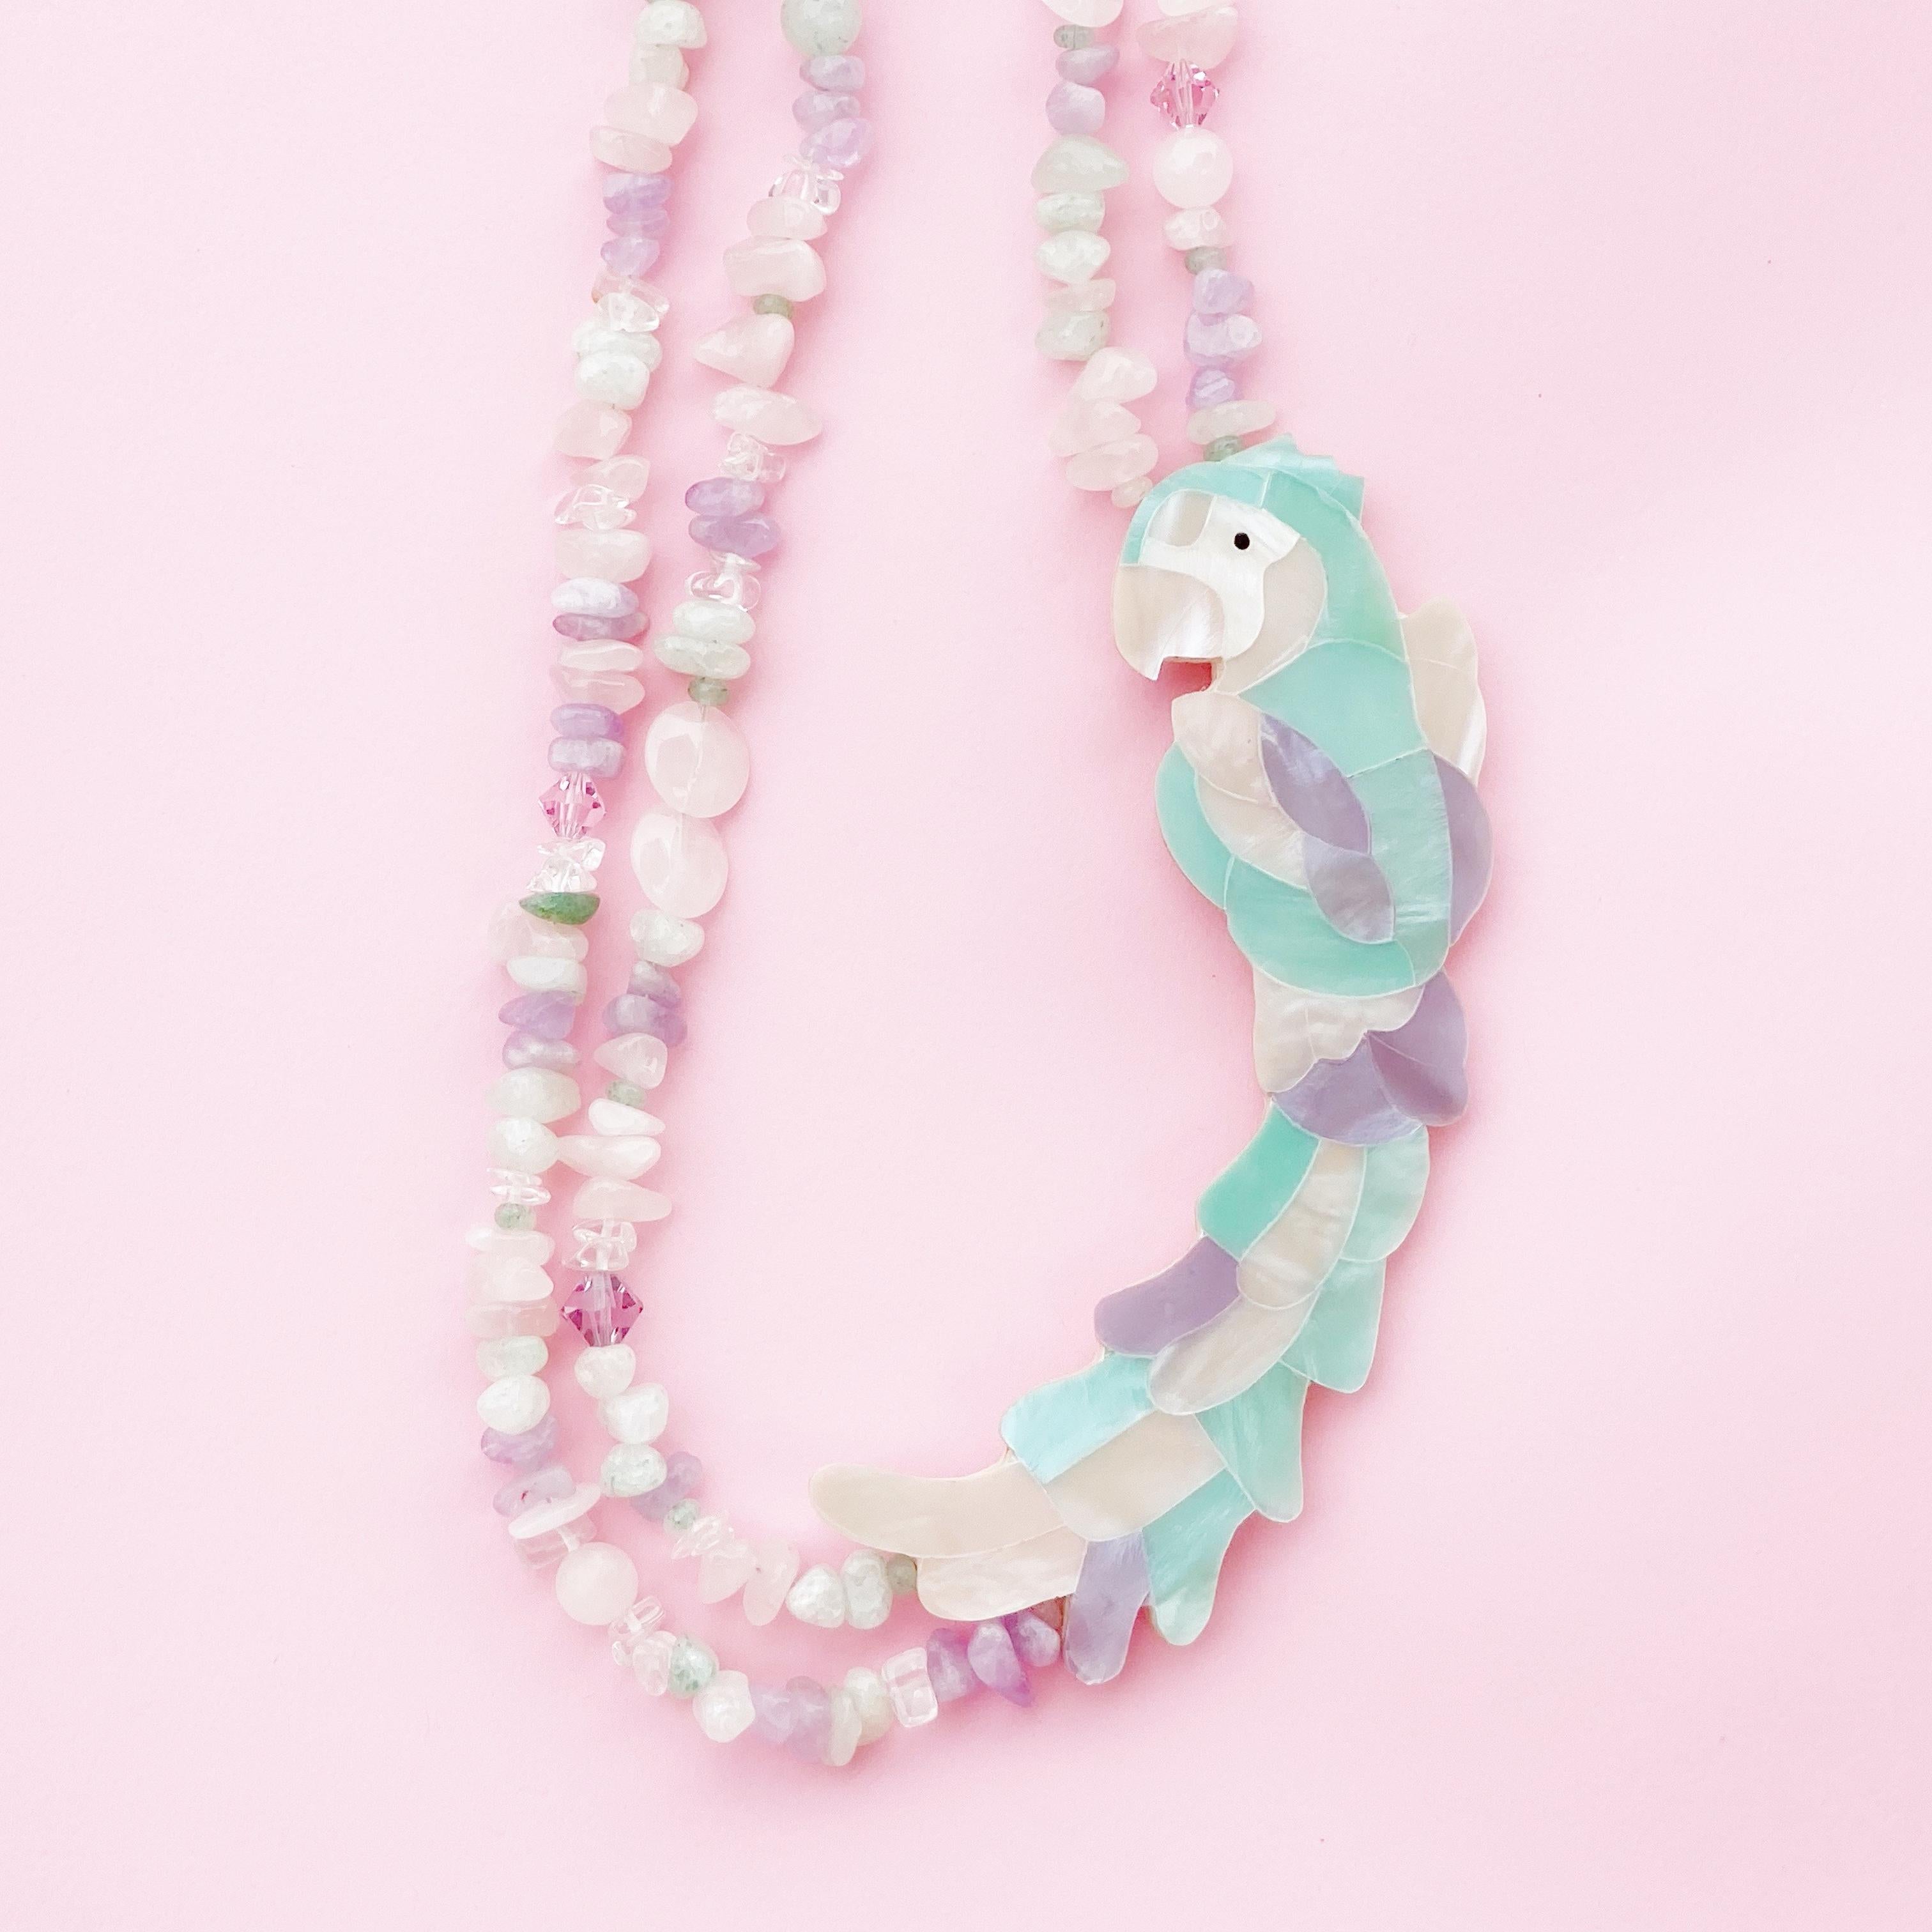 Pastel Mother of Pearl Parrot Necklace With Quartz Gemstones By Lee Sands, 1980s 2